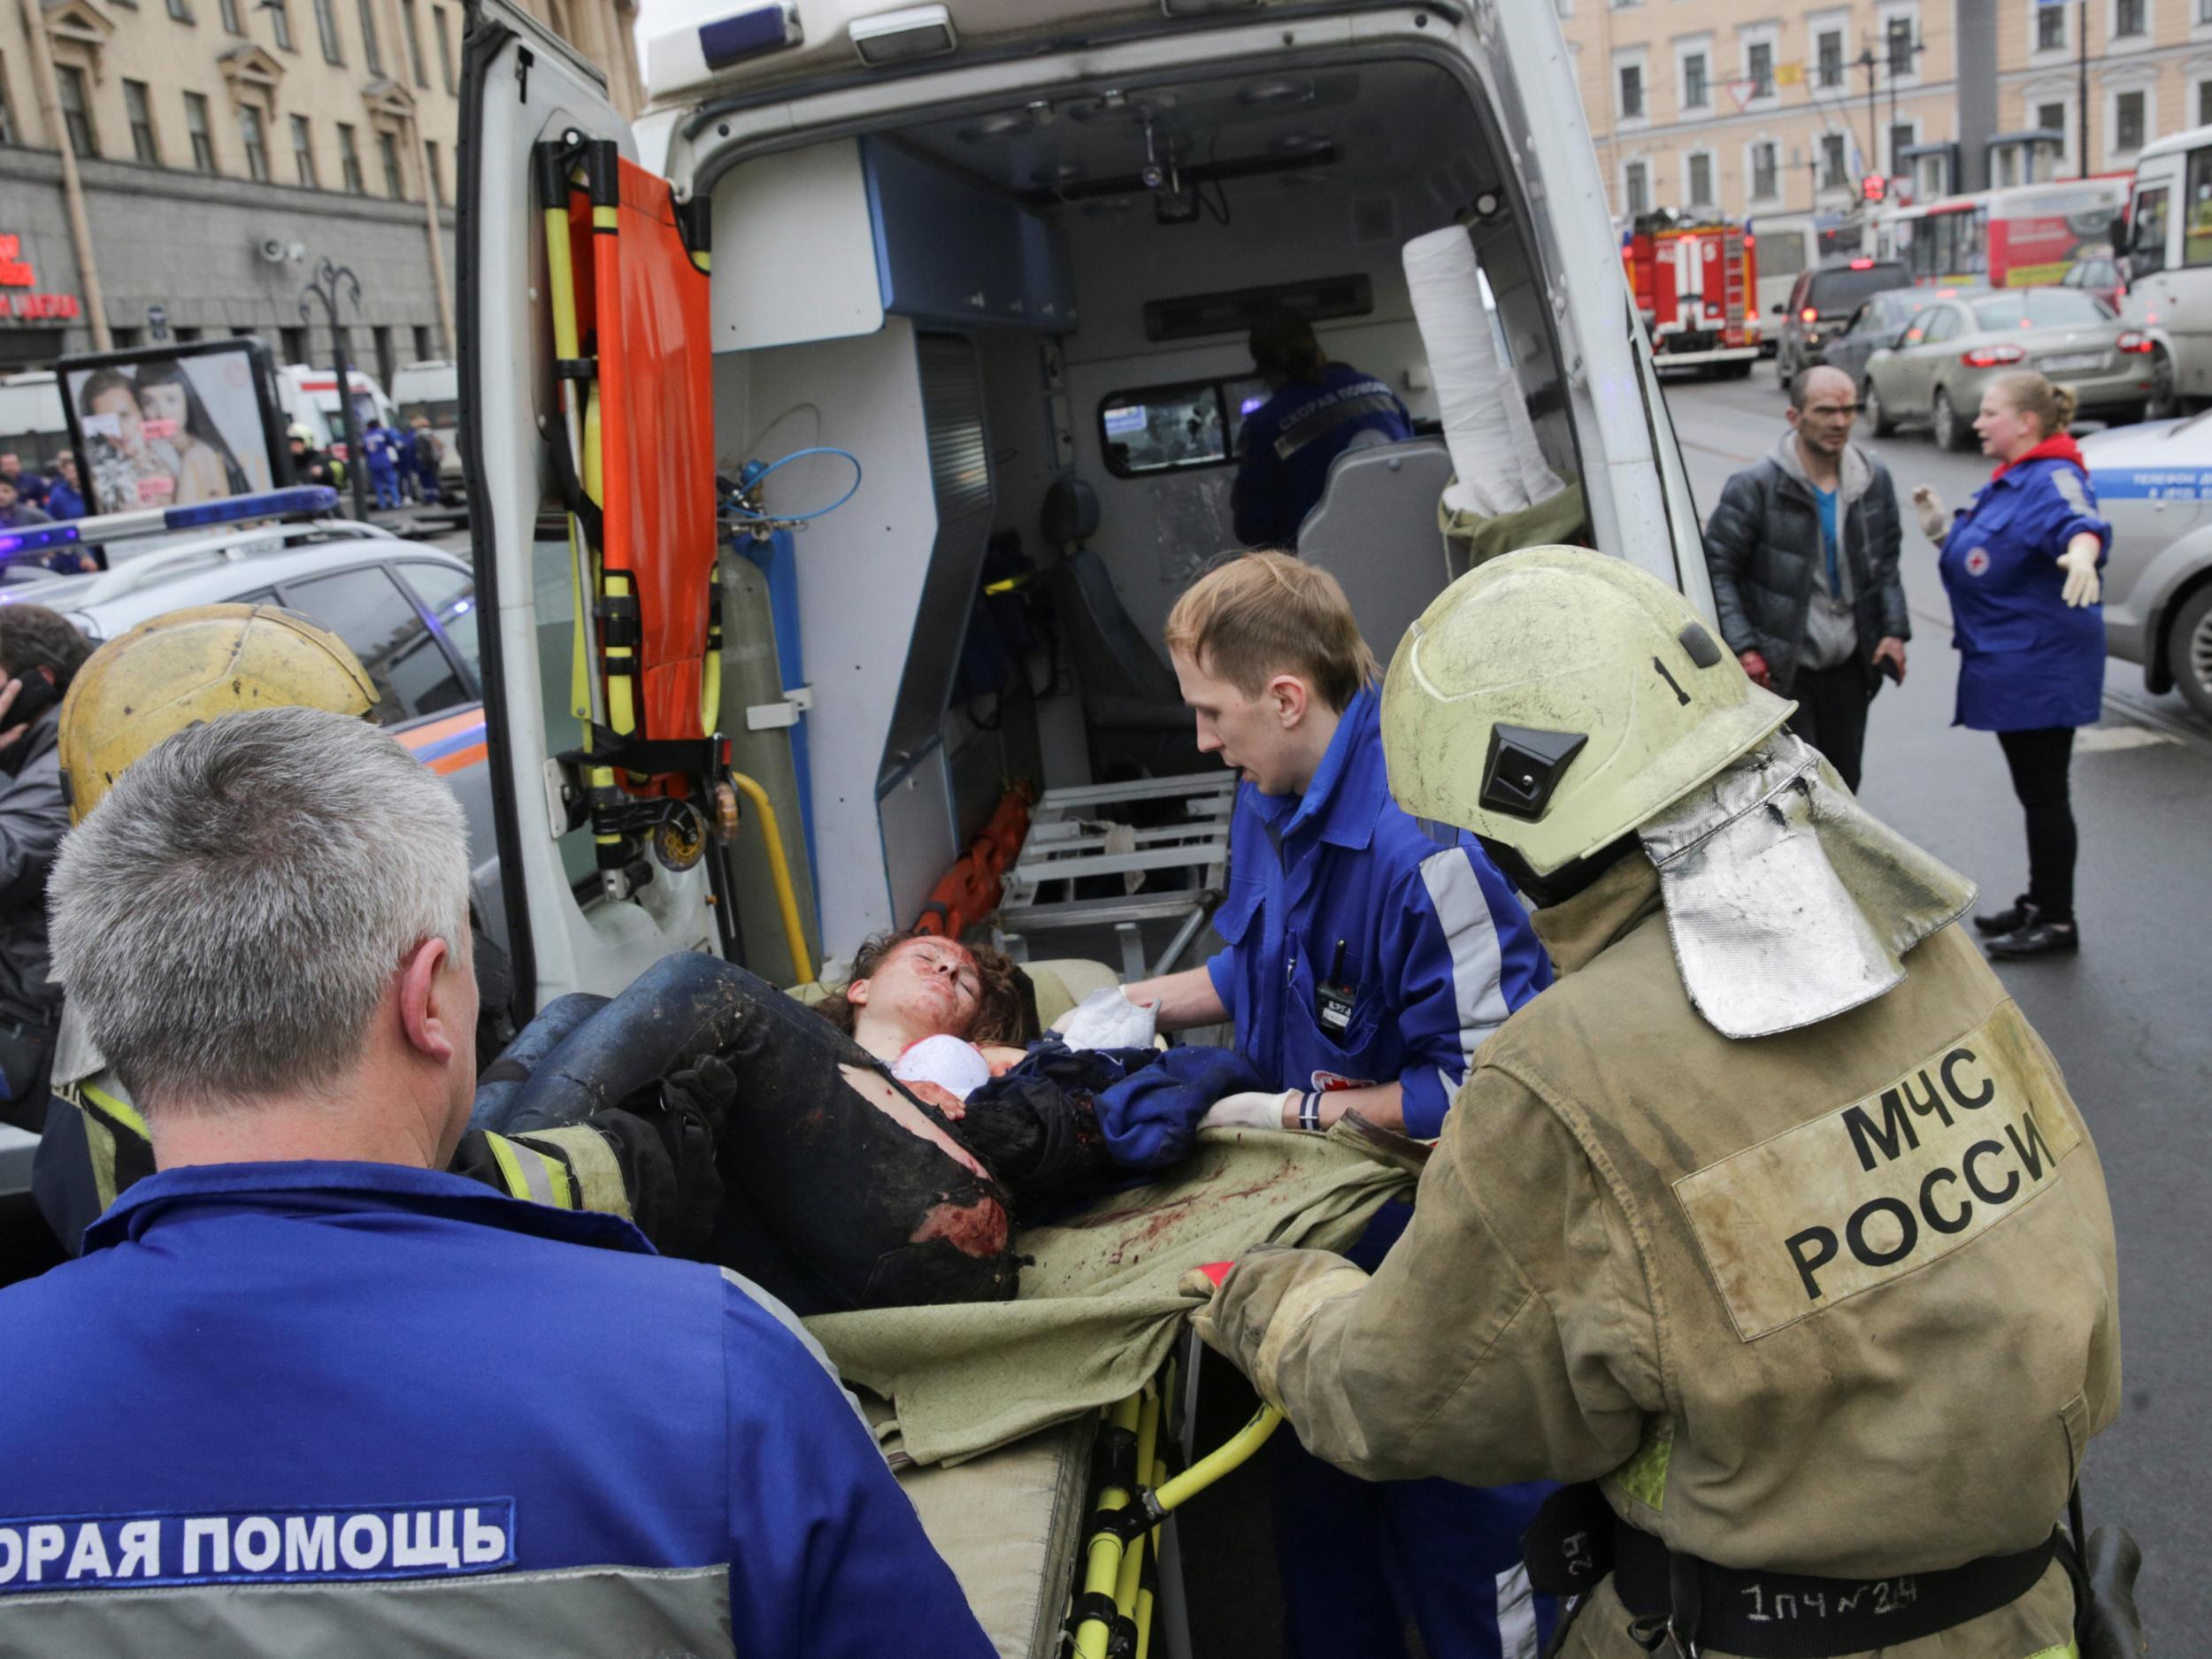 An injured person is helped by emergency services outside Sennaya Ploshchad metro station